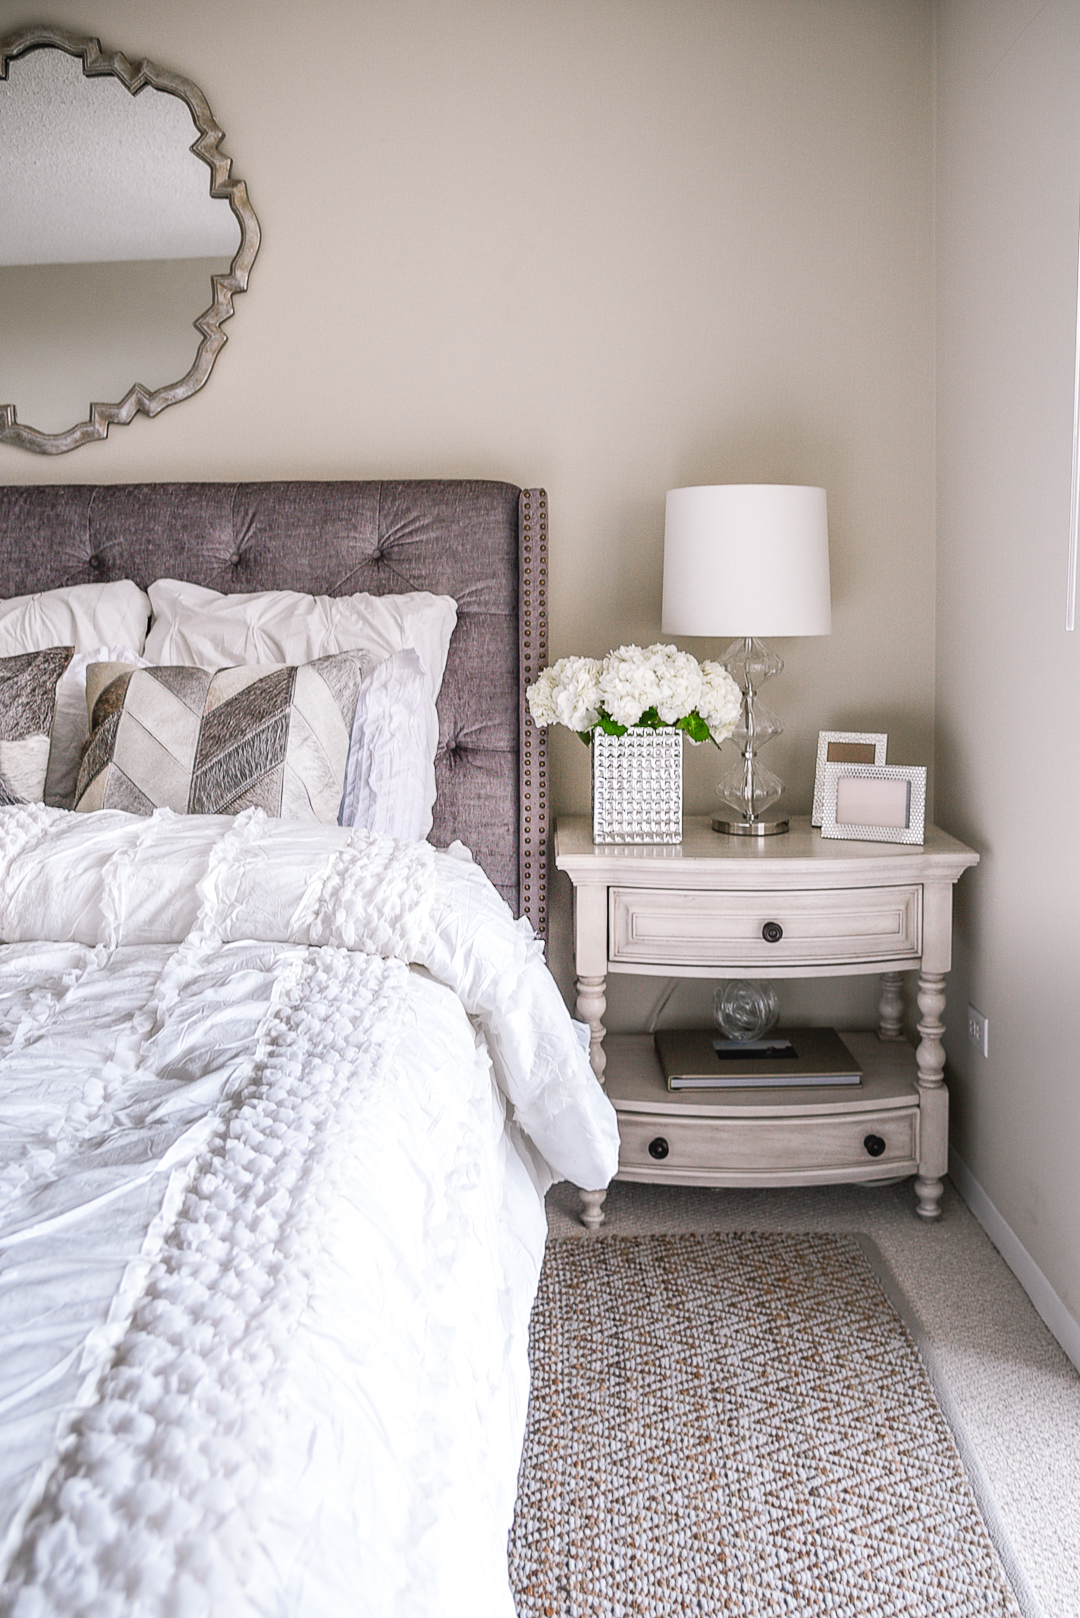 Grey nightstand with hydrangeas and a mirrored vase. - Our Master Bedroom Linen Refresh with Home Decorators by Chicago style blogger Visions of Vogue